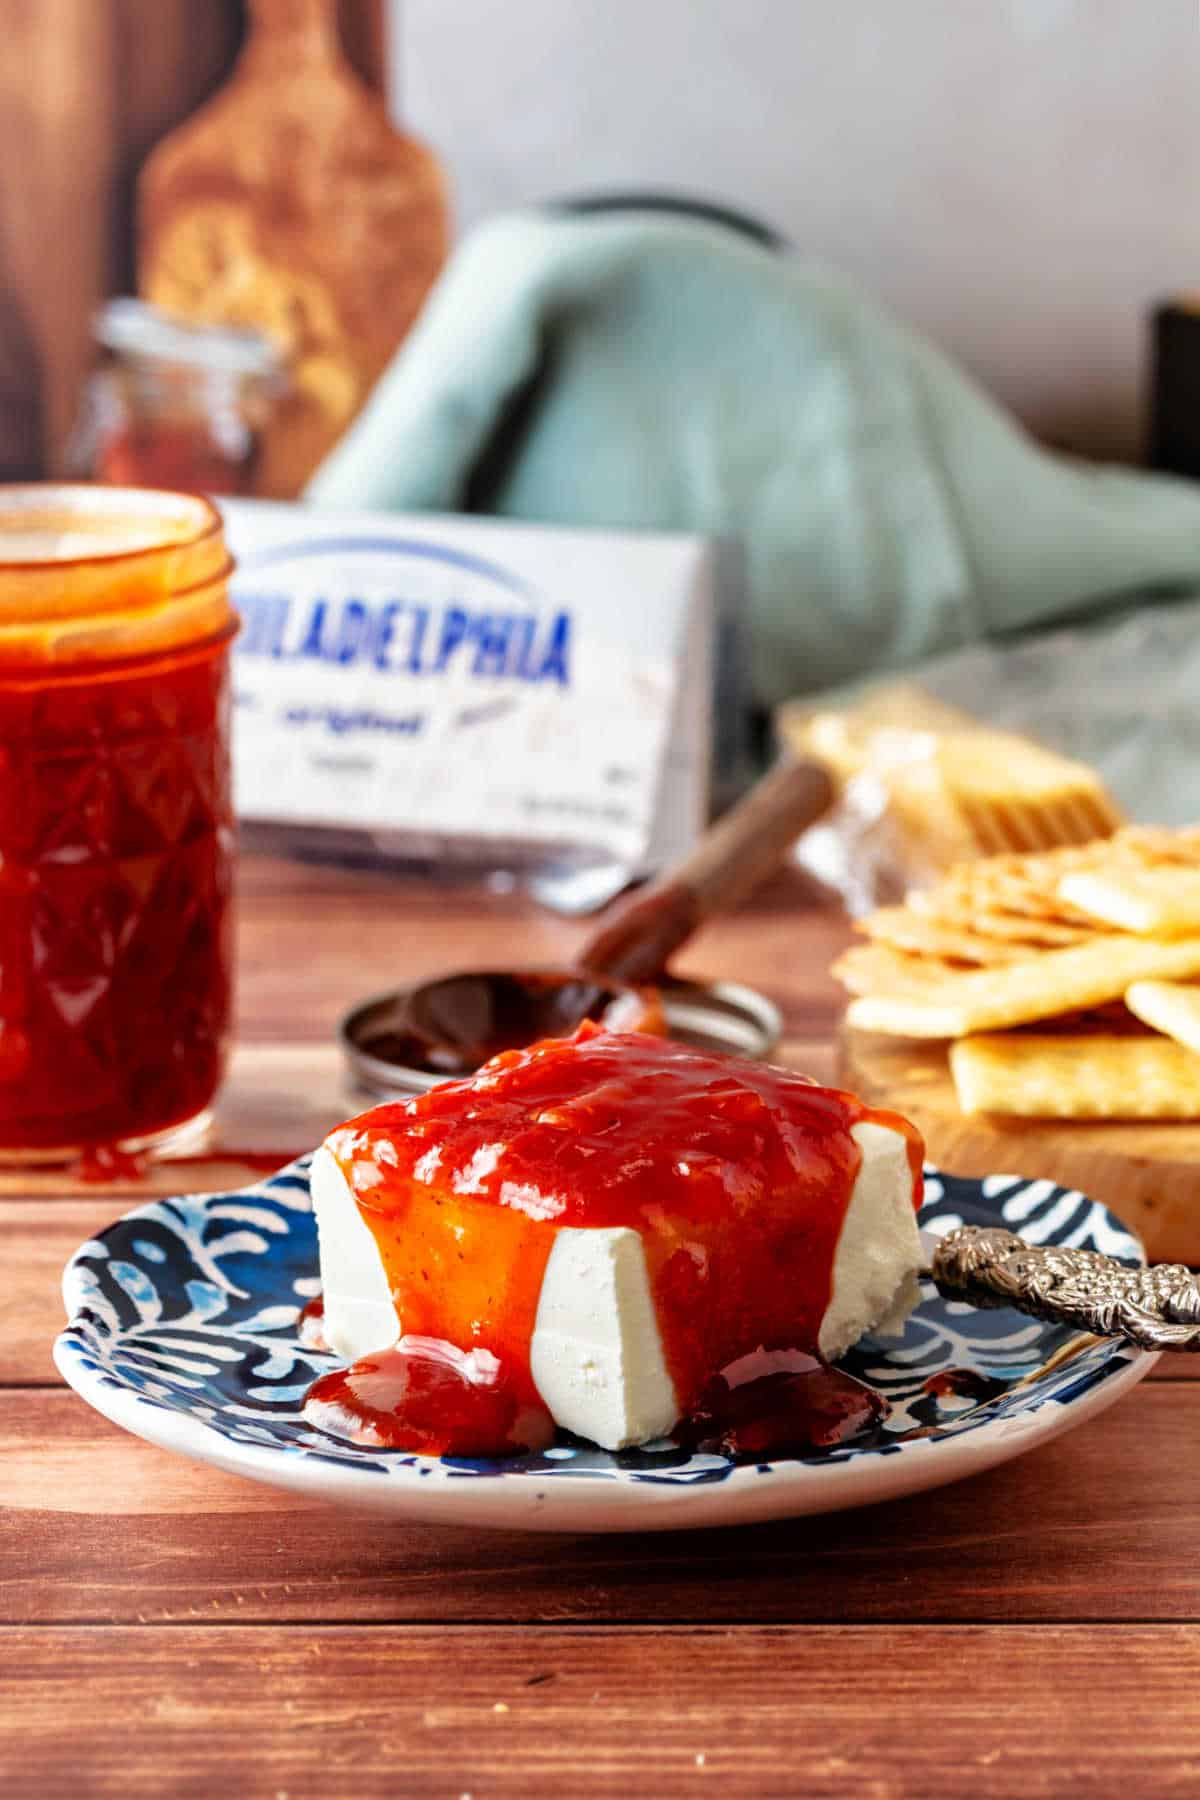 A squre of cream cheese on a plate with red sauce poured over the top of it.